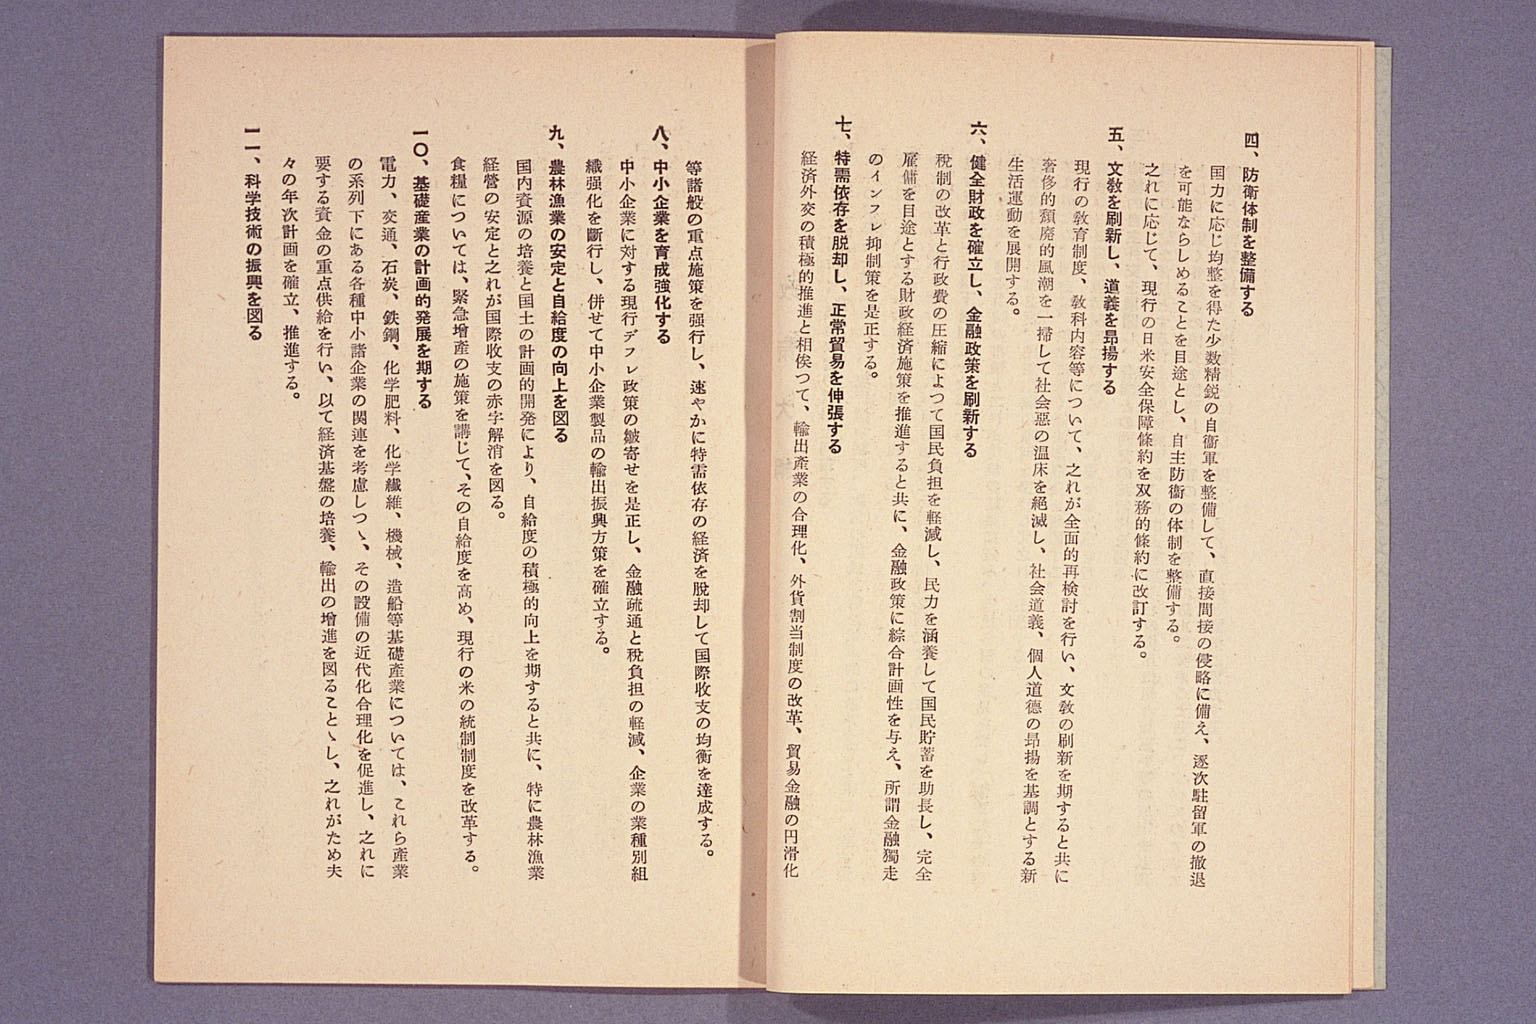 Declaration for inaugurating Japan Democratic Party, party platform, policy guideline, party rules and codes (larger)